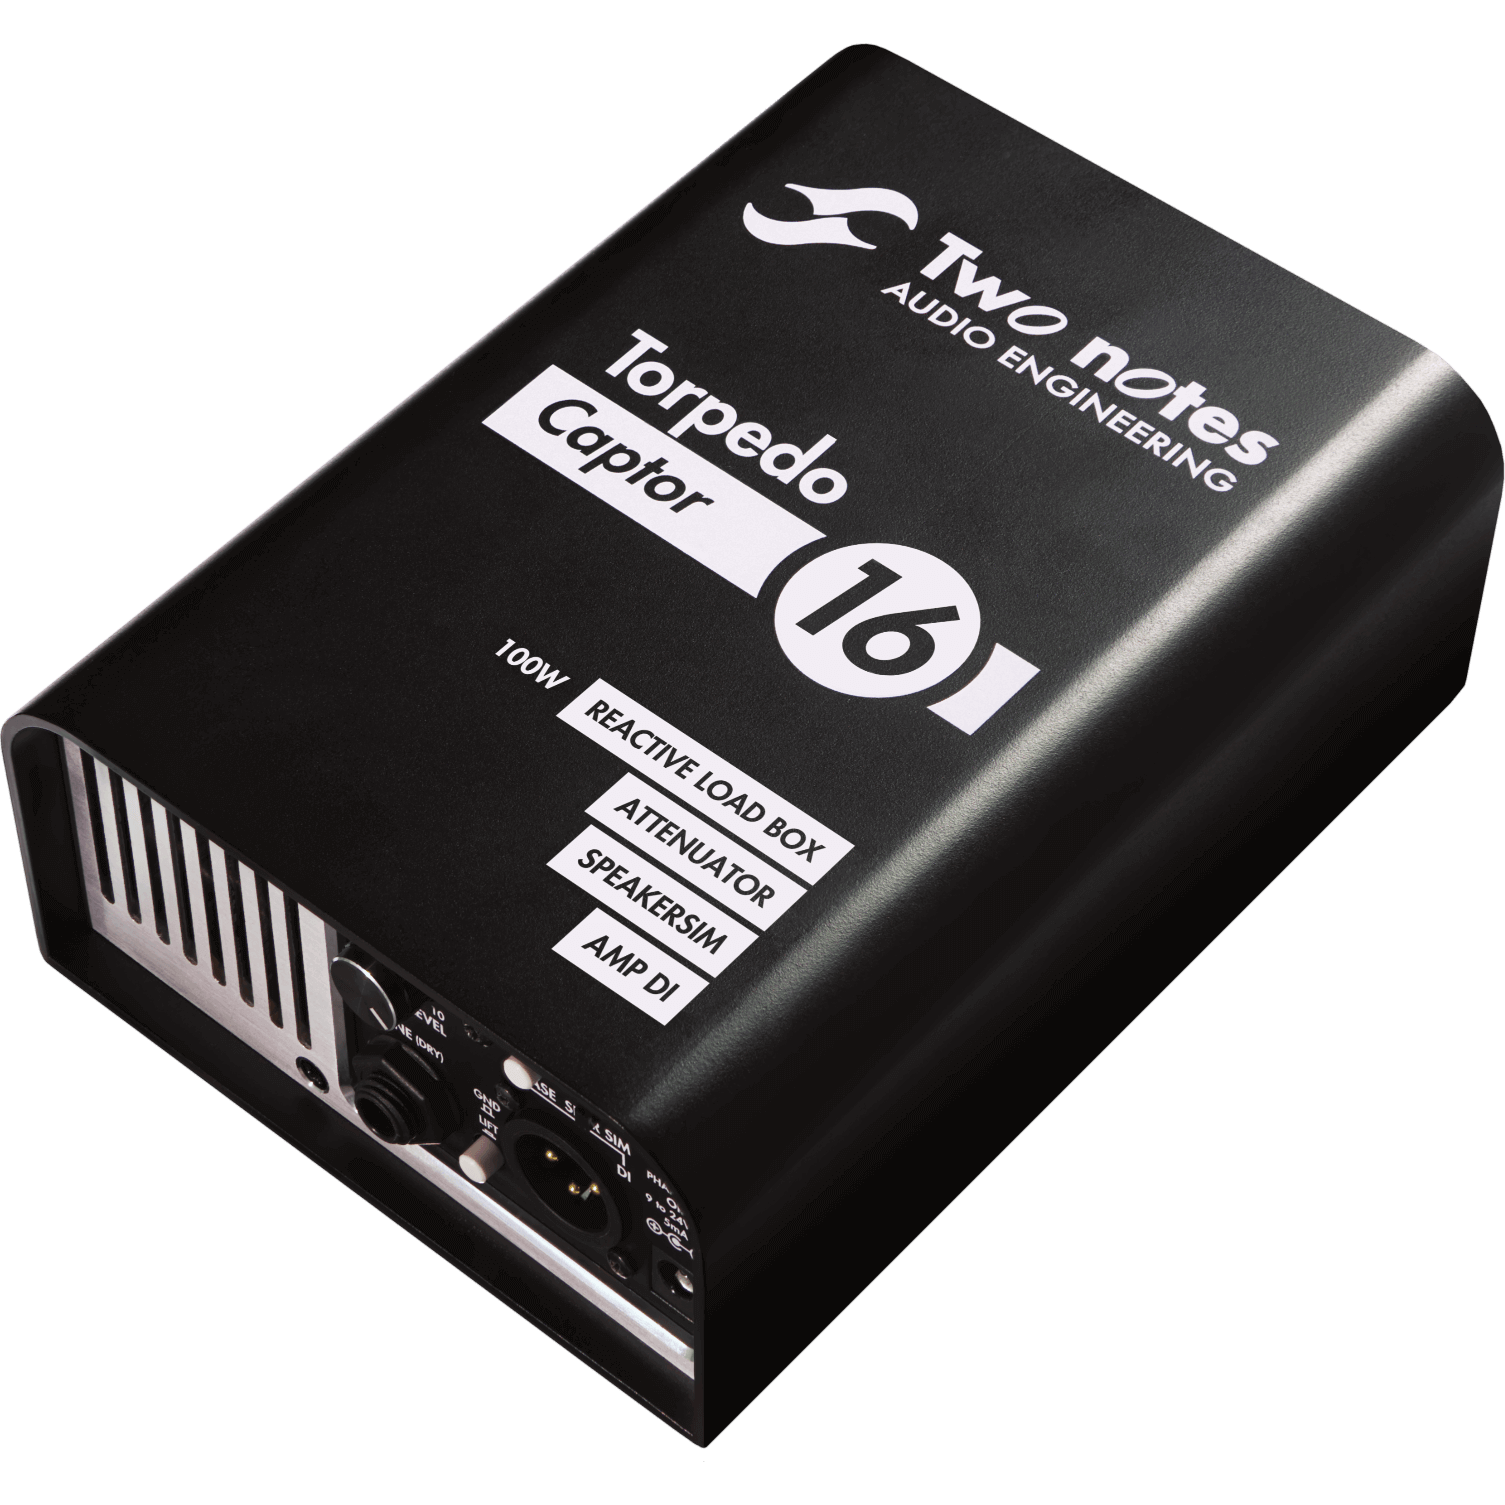 Two Notes Torpedo Captor 100w 16 Ohm Reactive Load Box